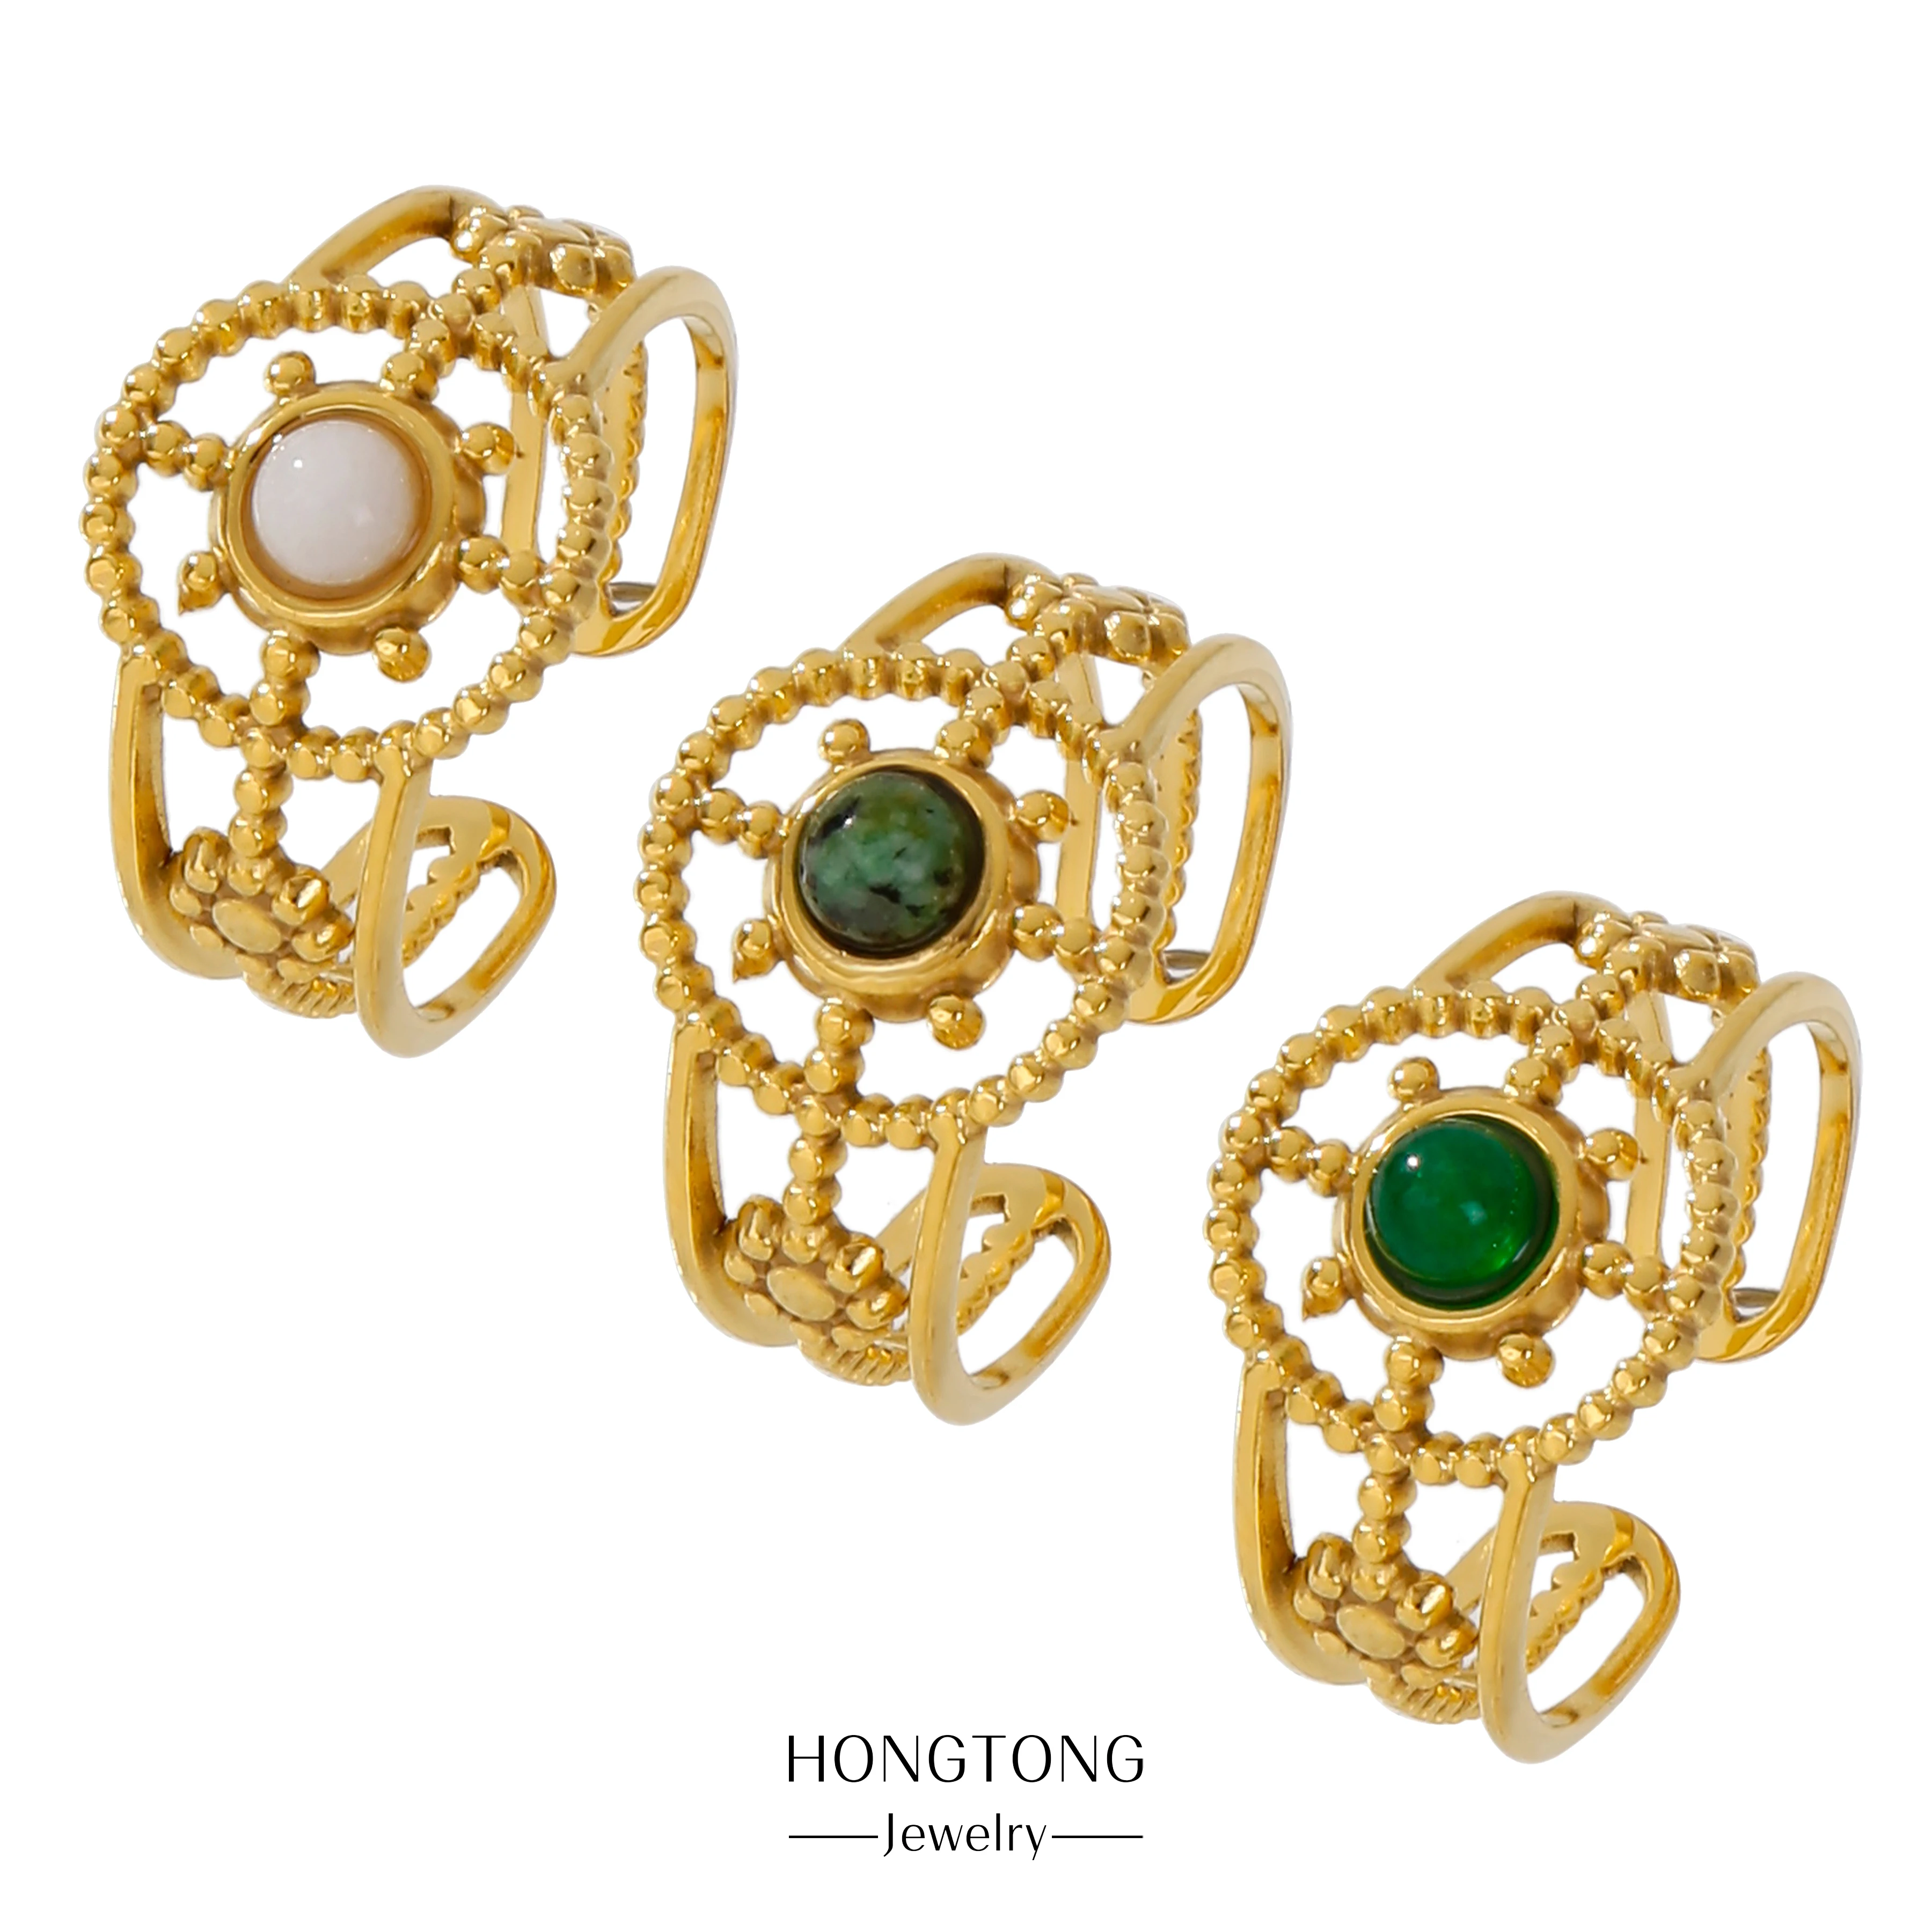 

HONGTONG Real Gold Plating Beautiful Charm Ring Gemstone Fashion Ring Fashion Stainless Steel Ring Jewelry Gift Banquet